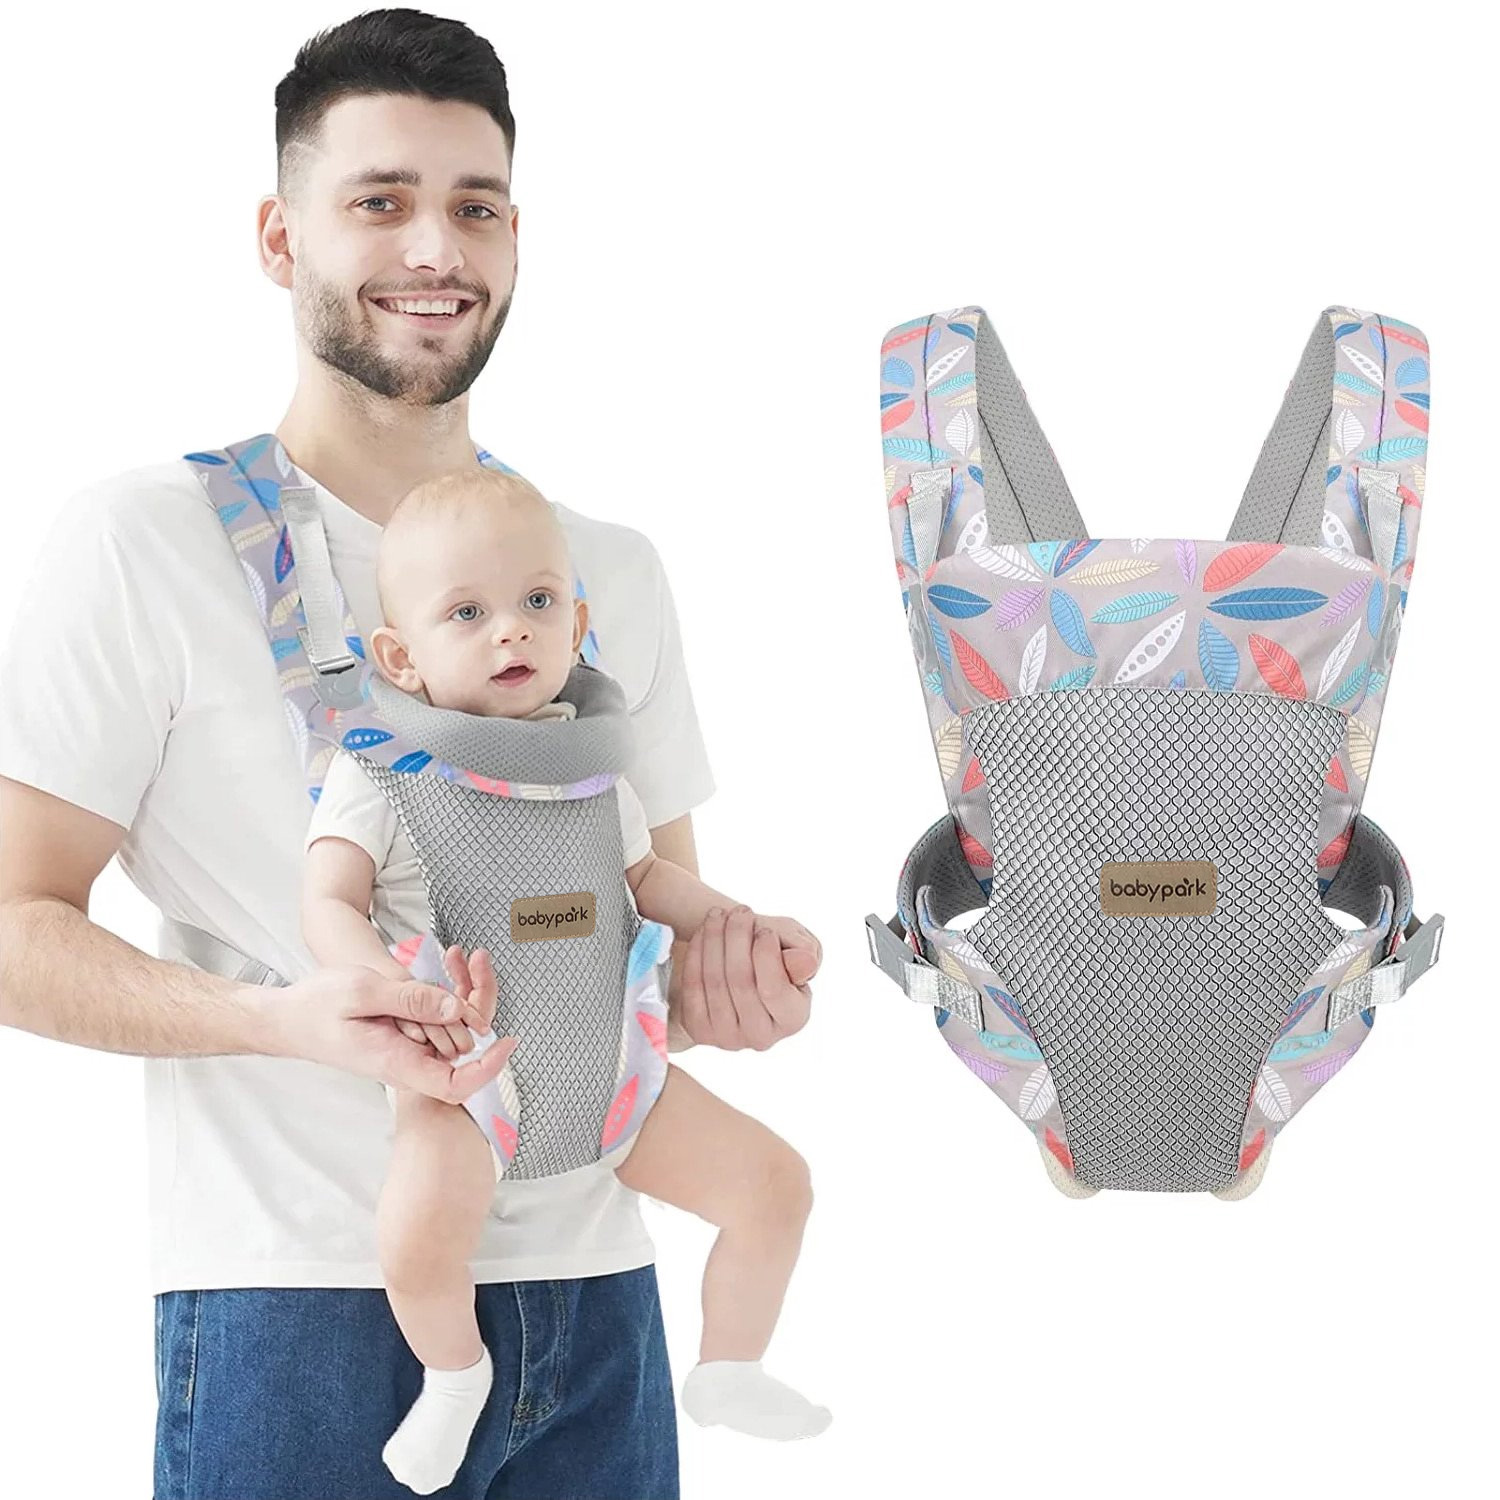 Yadala Baby Carrier, 4-in-1 Leaf Baby Carrier, Front and Back Baby Sling with Adjustable Holder - image 1 of 7